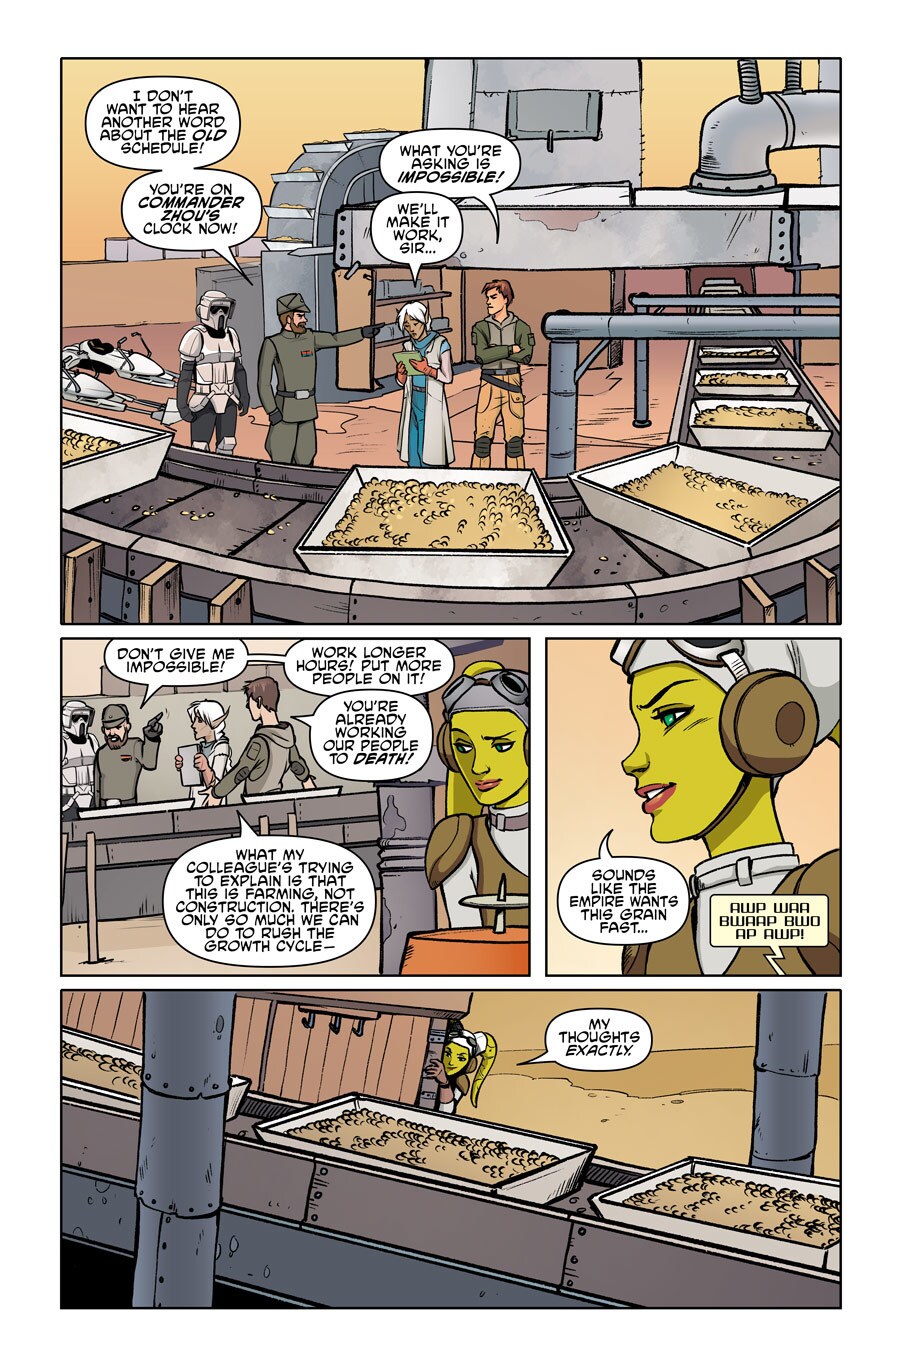 Hera Syndulla watches as Imperials pressure farmers to speed up their production schedule in a series of comic panels.